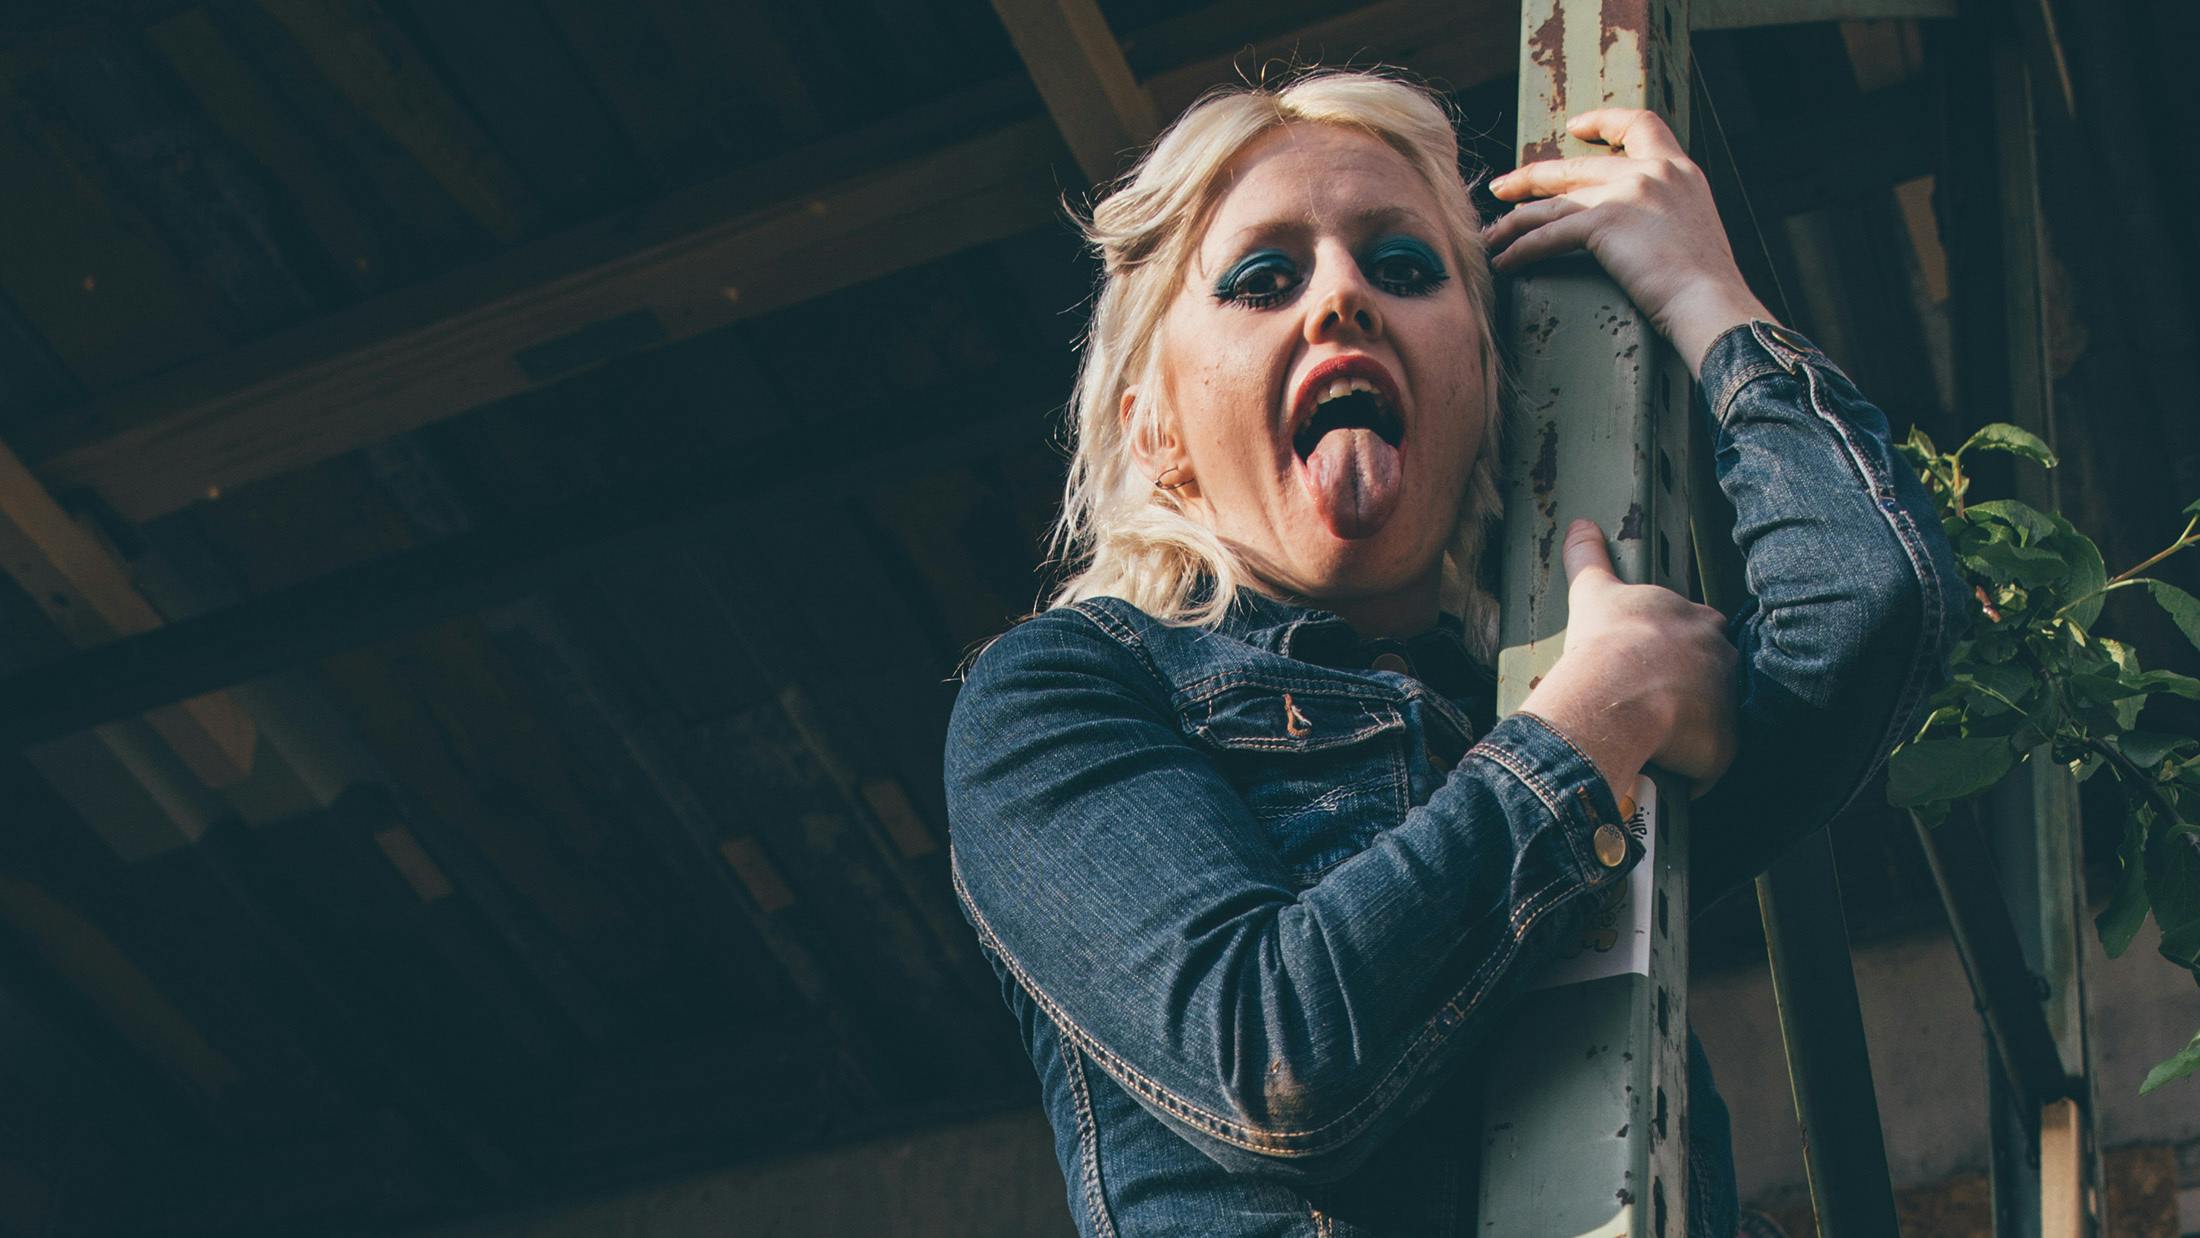 Amyl And The Sniffers' Amy Taylor: The 10 Songs That Changed My Life